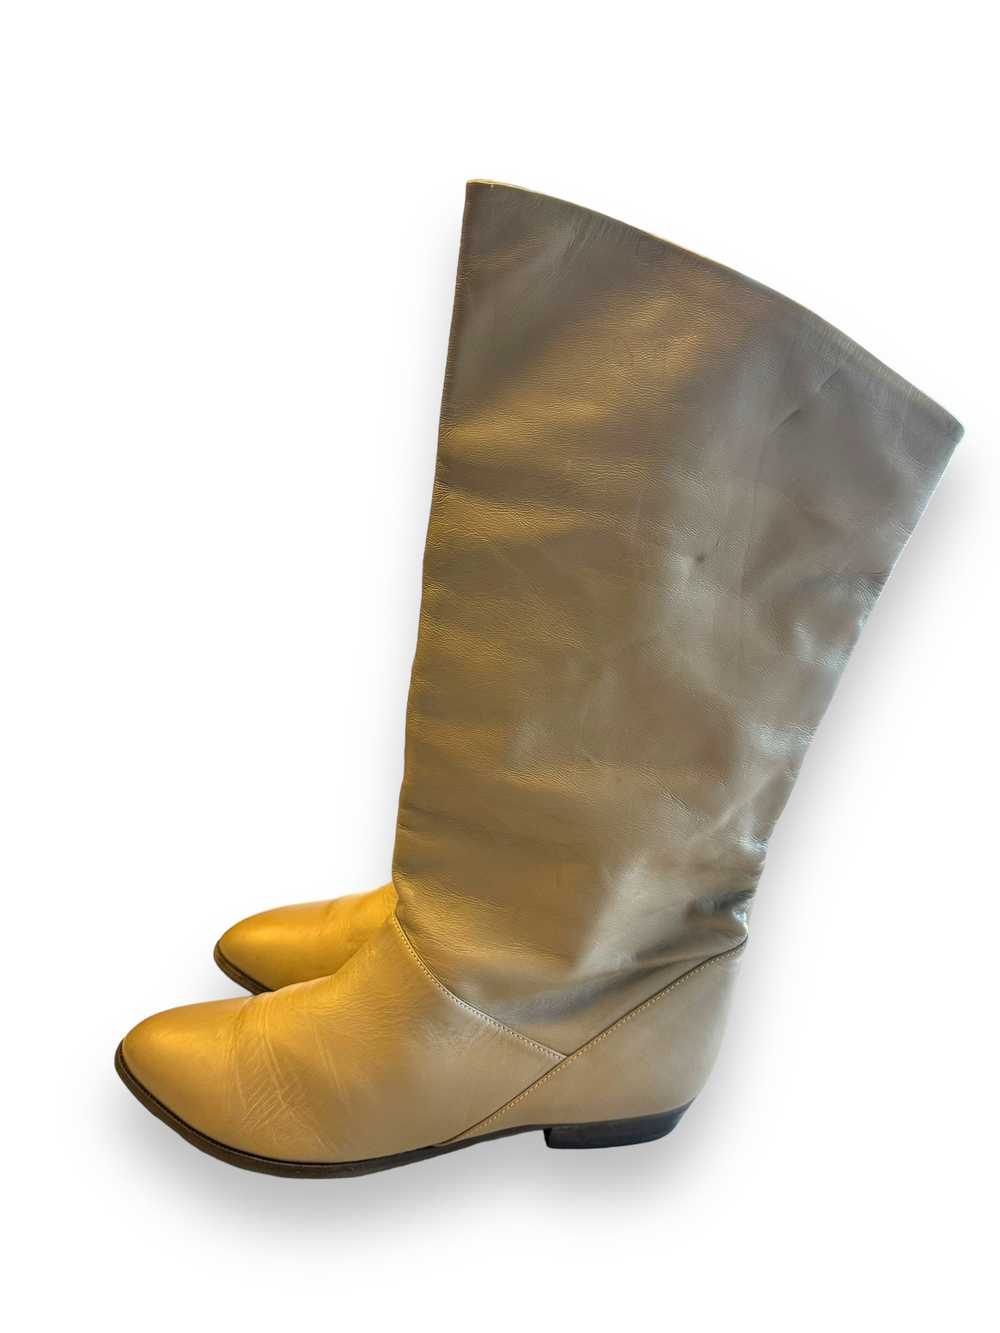 1980s Flat Beige Leather Boots - image 1